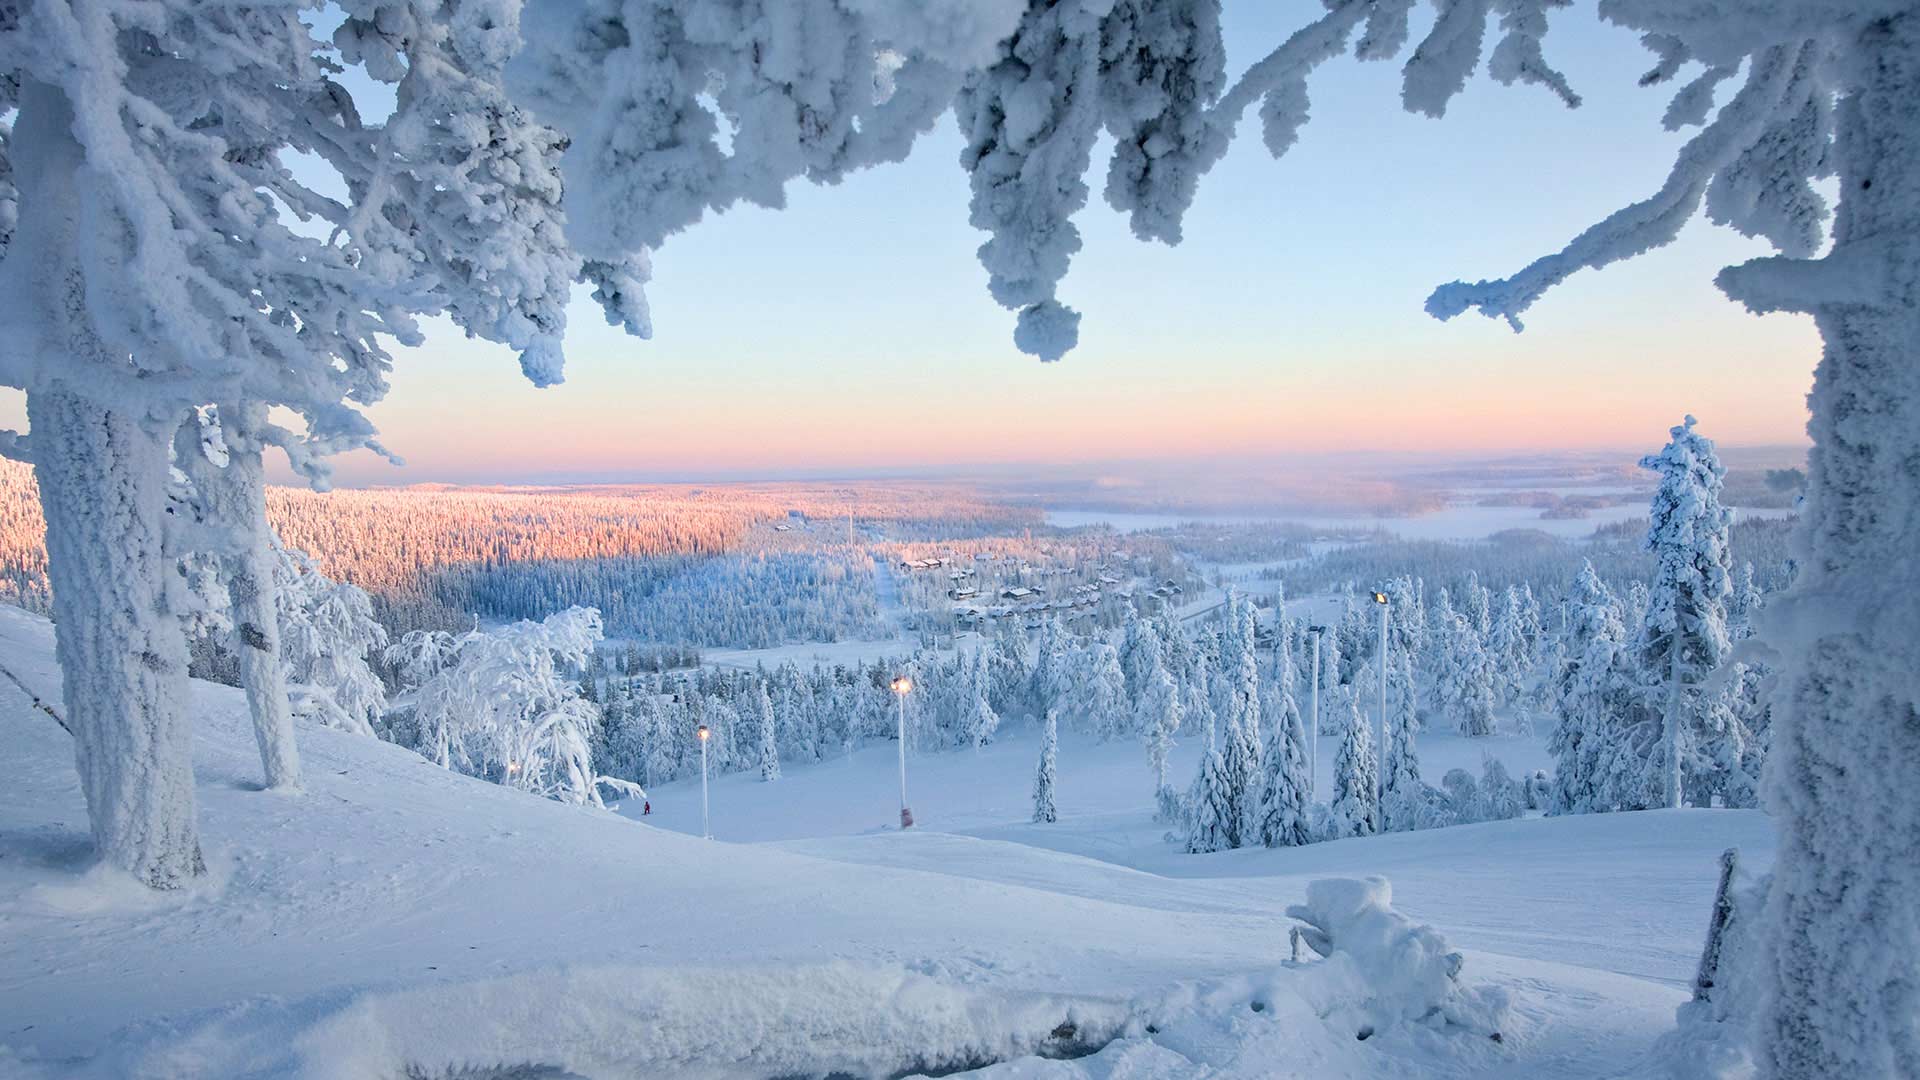 Snow-covered trees in Finnish Lapland